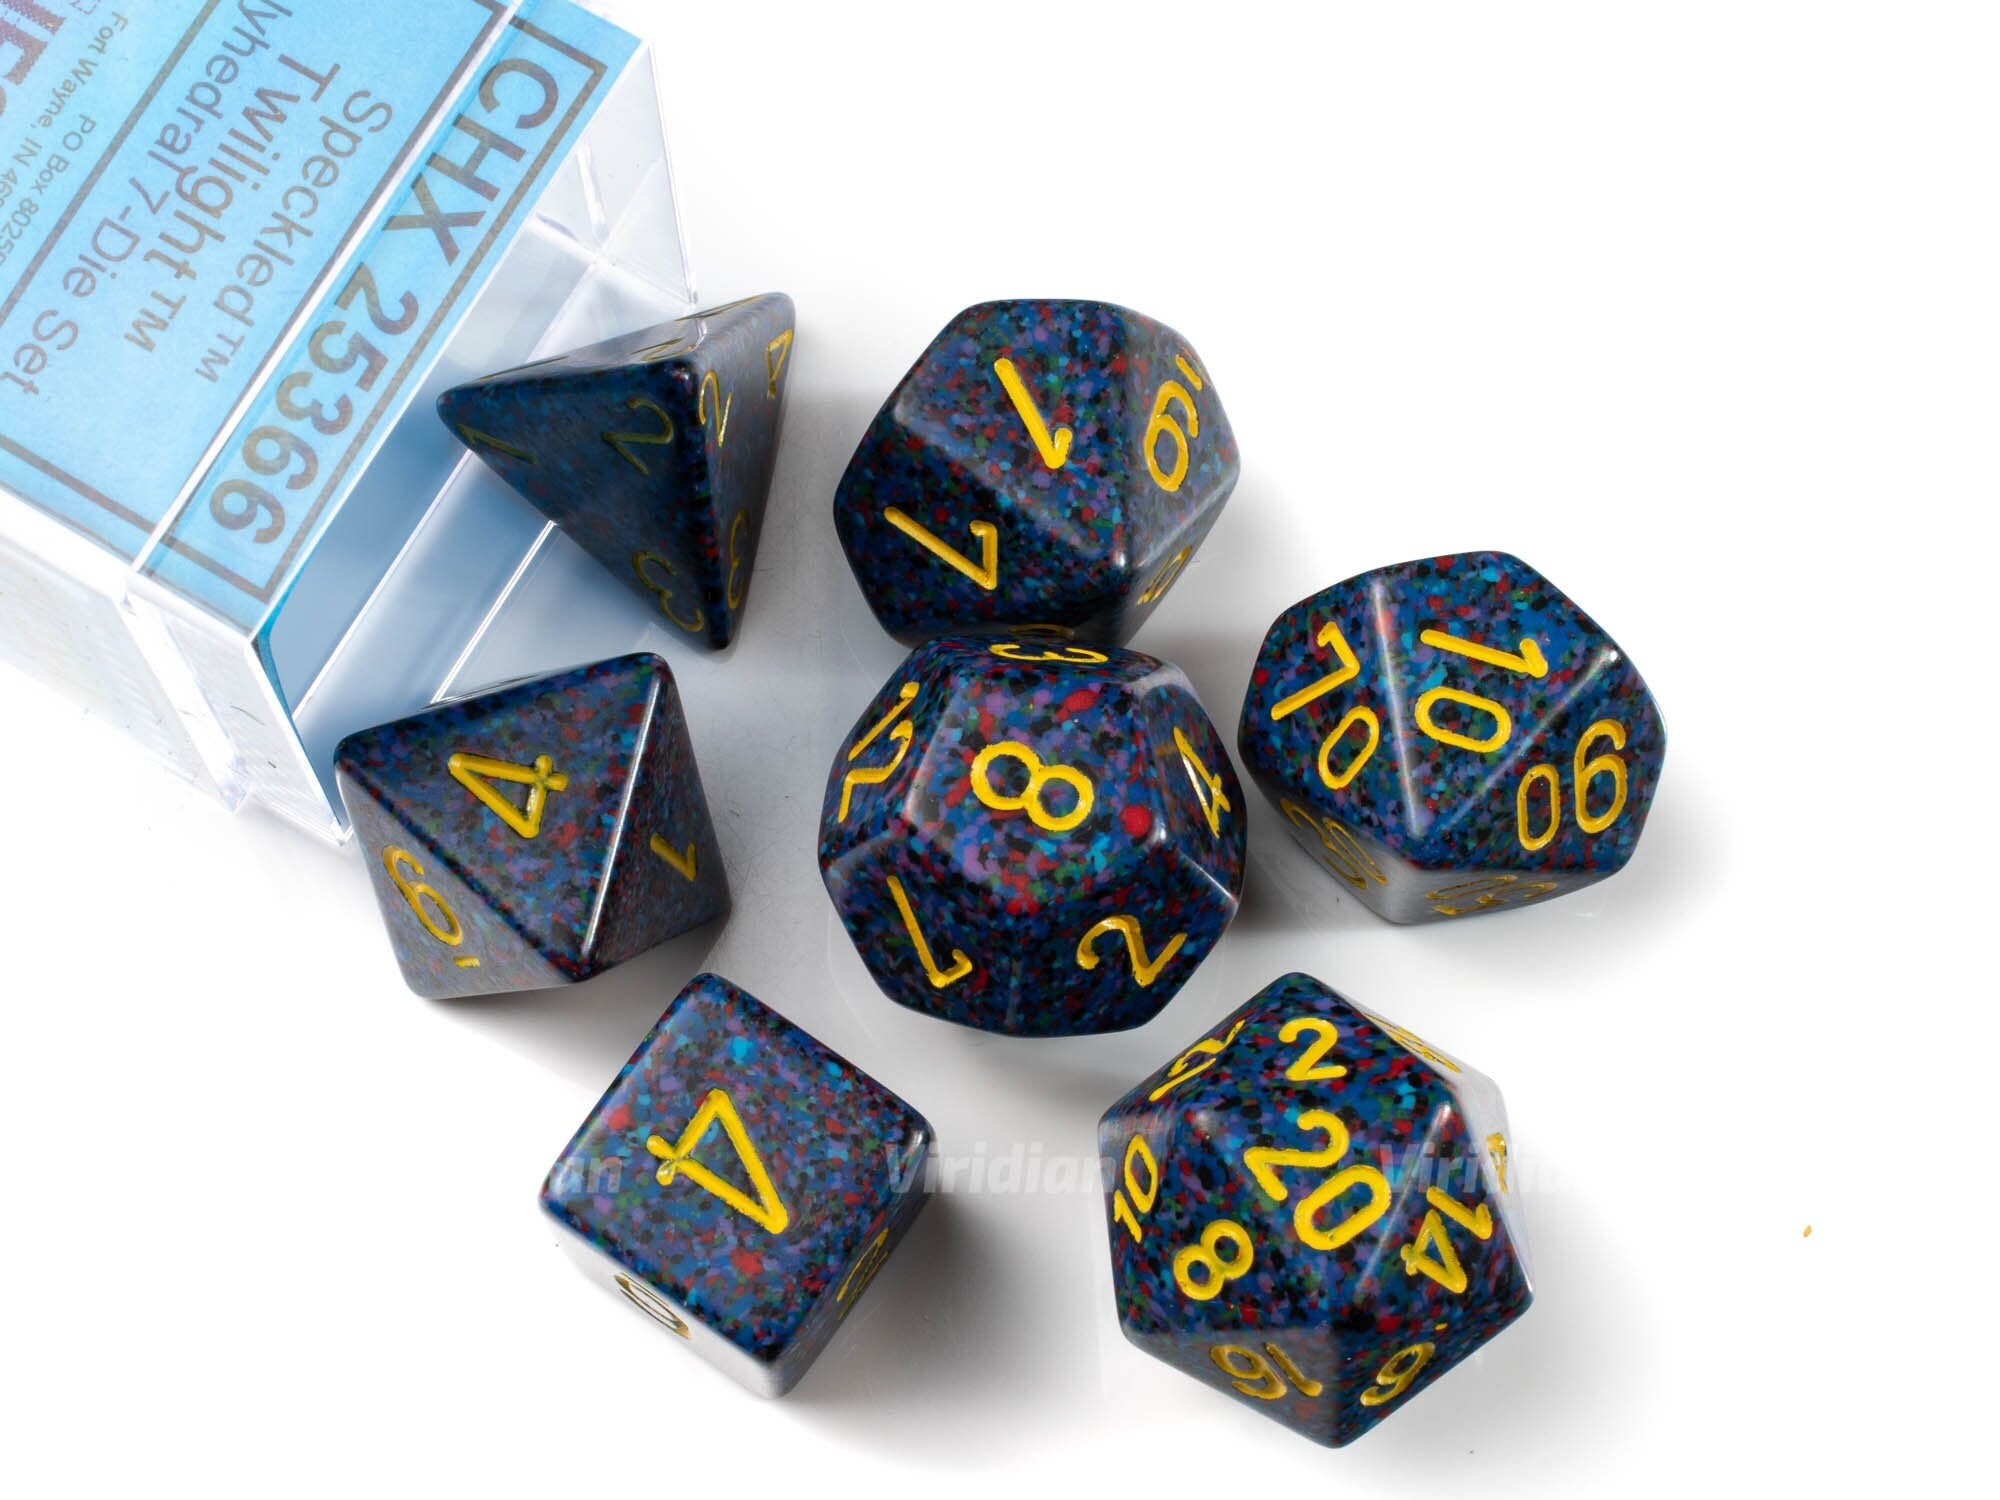 Chessex 7 Set Polyhedral Dice Speckled Twilight CHX25366 in Stock for sale online 